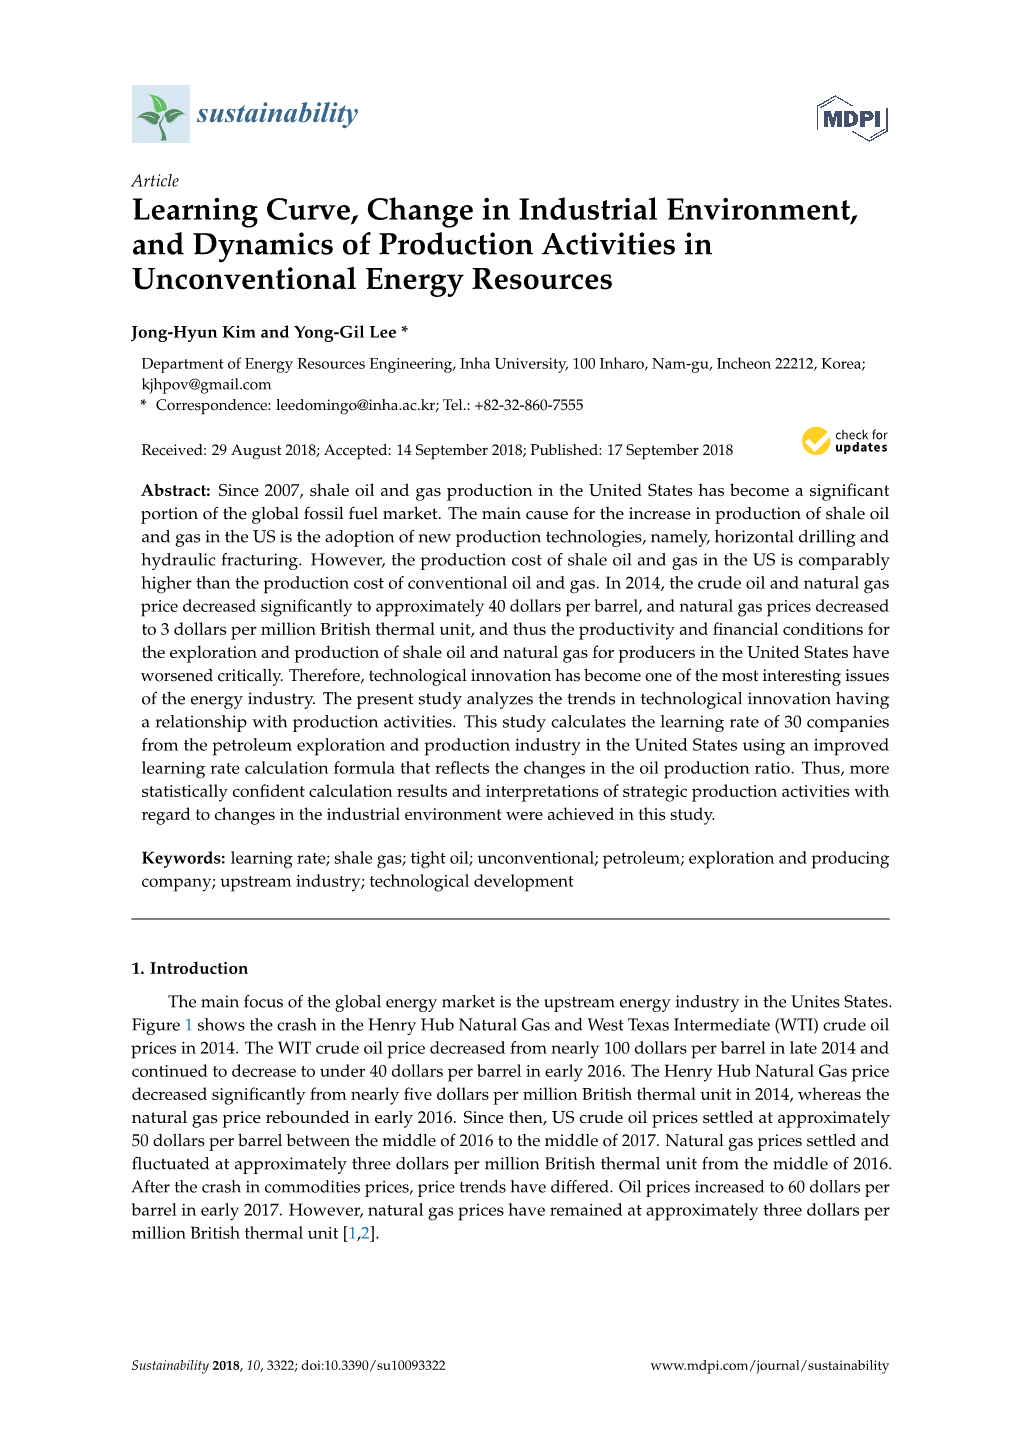 Learning Curve, Change in Industrial Environment, and Dynamics of Production Activities in Unconventional Energy Resources